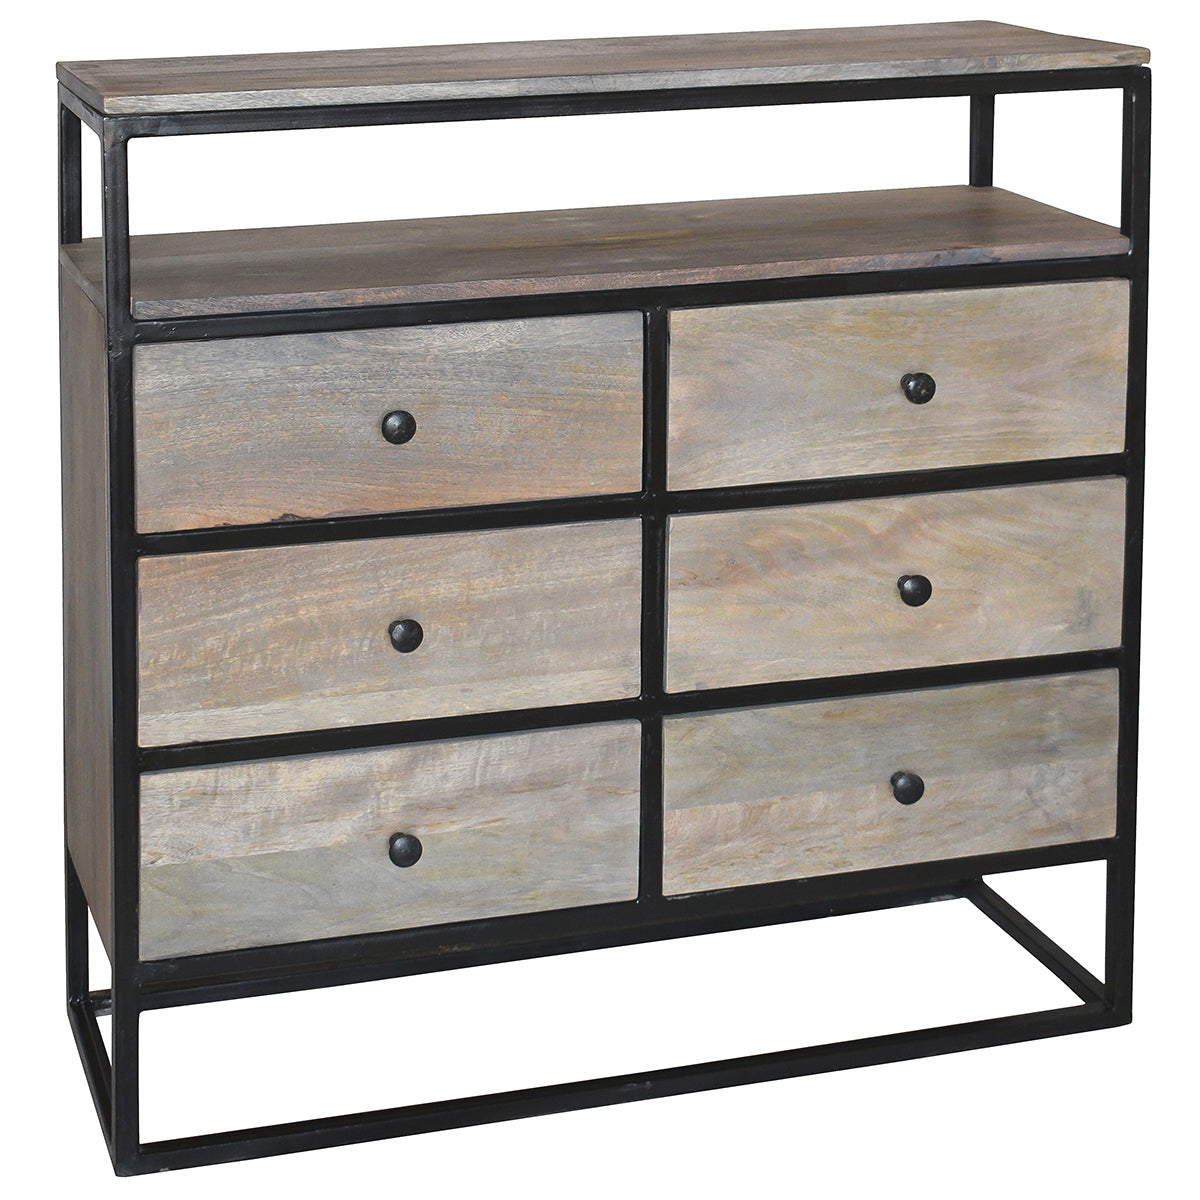 Leland Iron Wood Chest Gray Brown Wrightwood Furniture